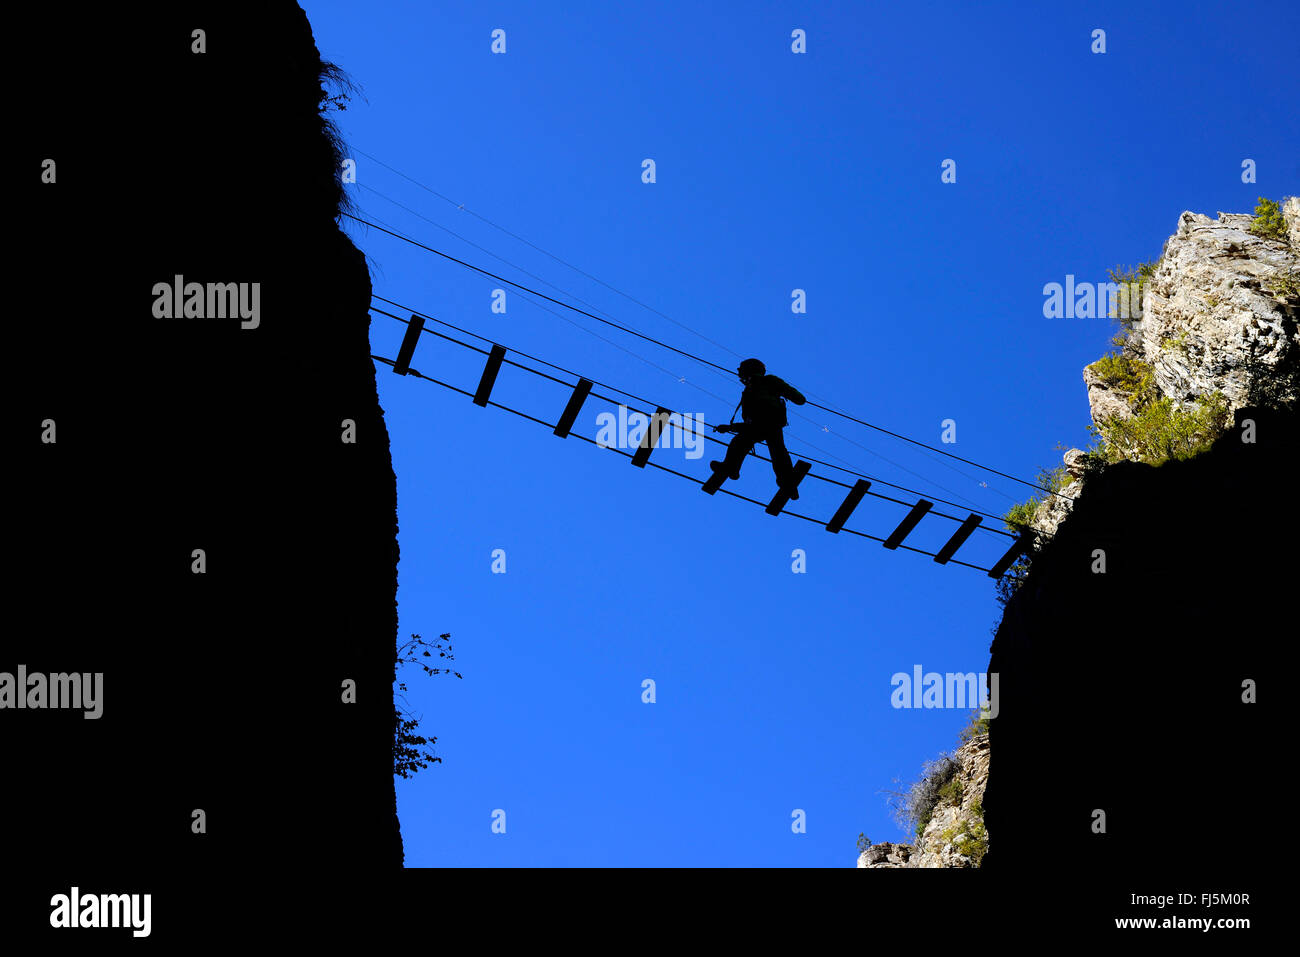 climber crossing the canyon on a suspension bridge, Durance Canyon, France, Hautes Alpes, Chateau Queyras Stock Photo